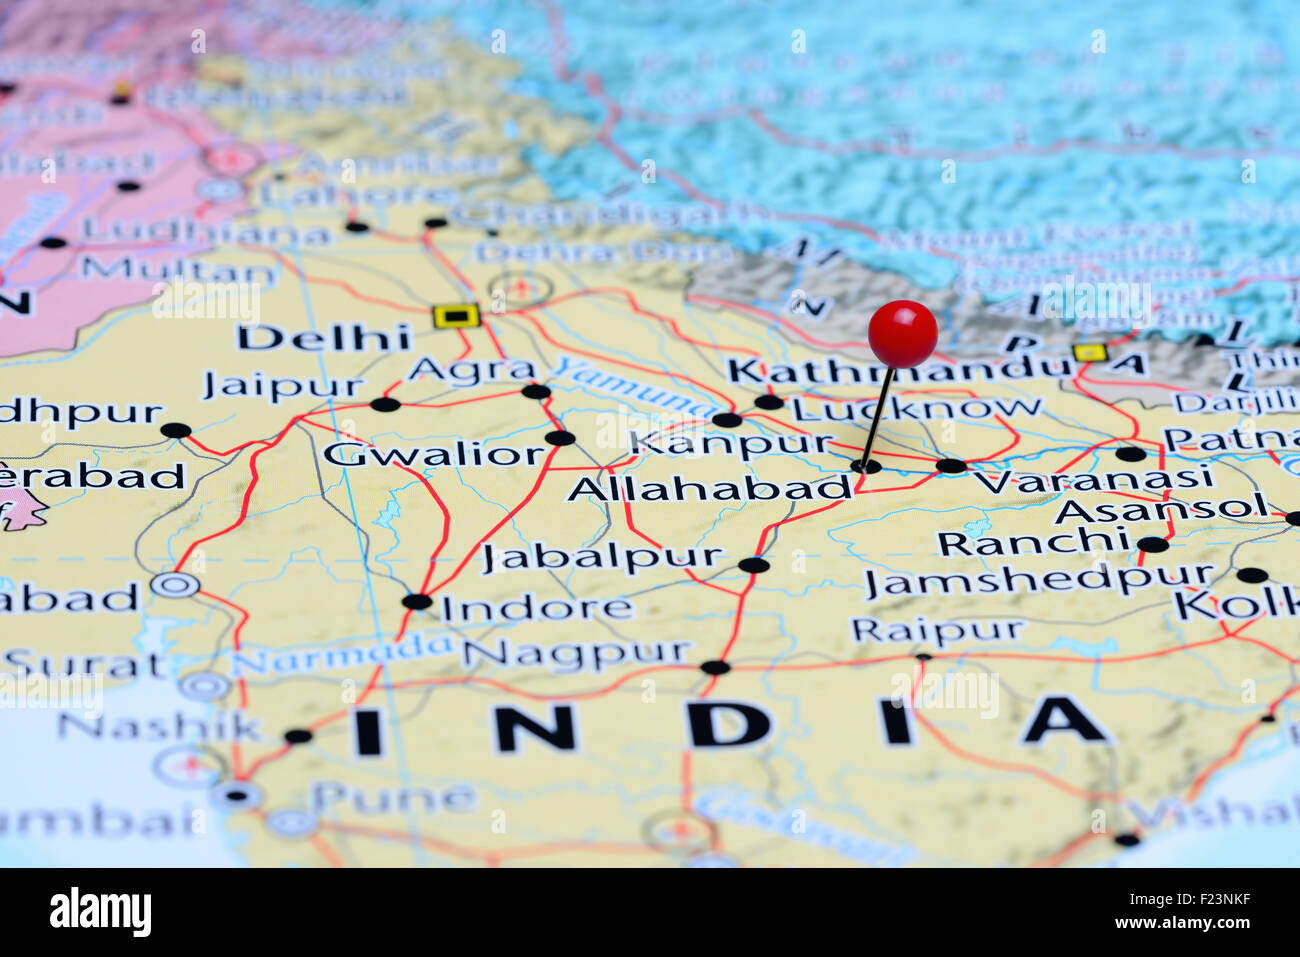 Allahabad pinned on a map of Asia Stock Photo